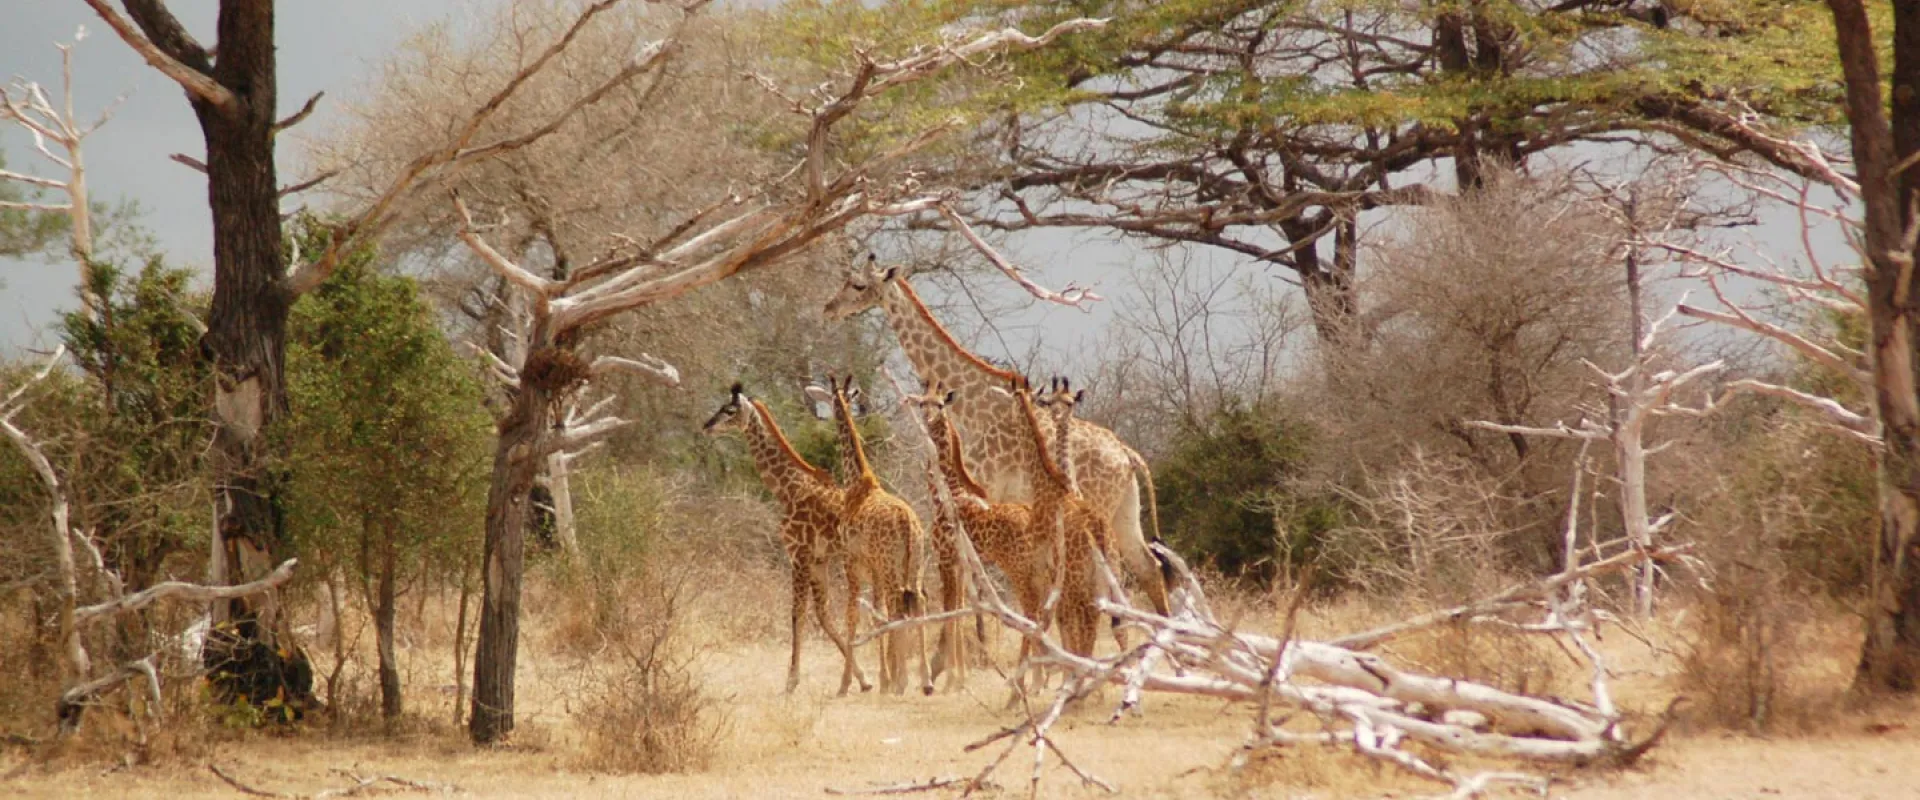 Giraffe Social Systems: Friends in High Places